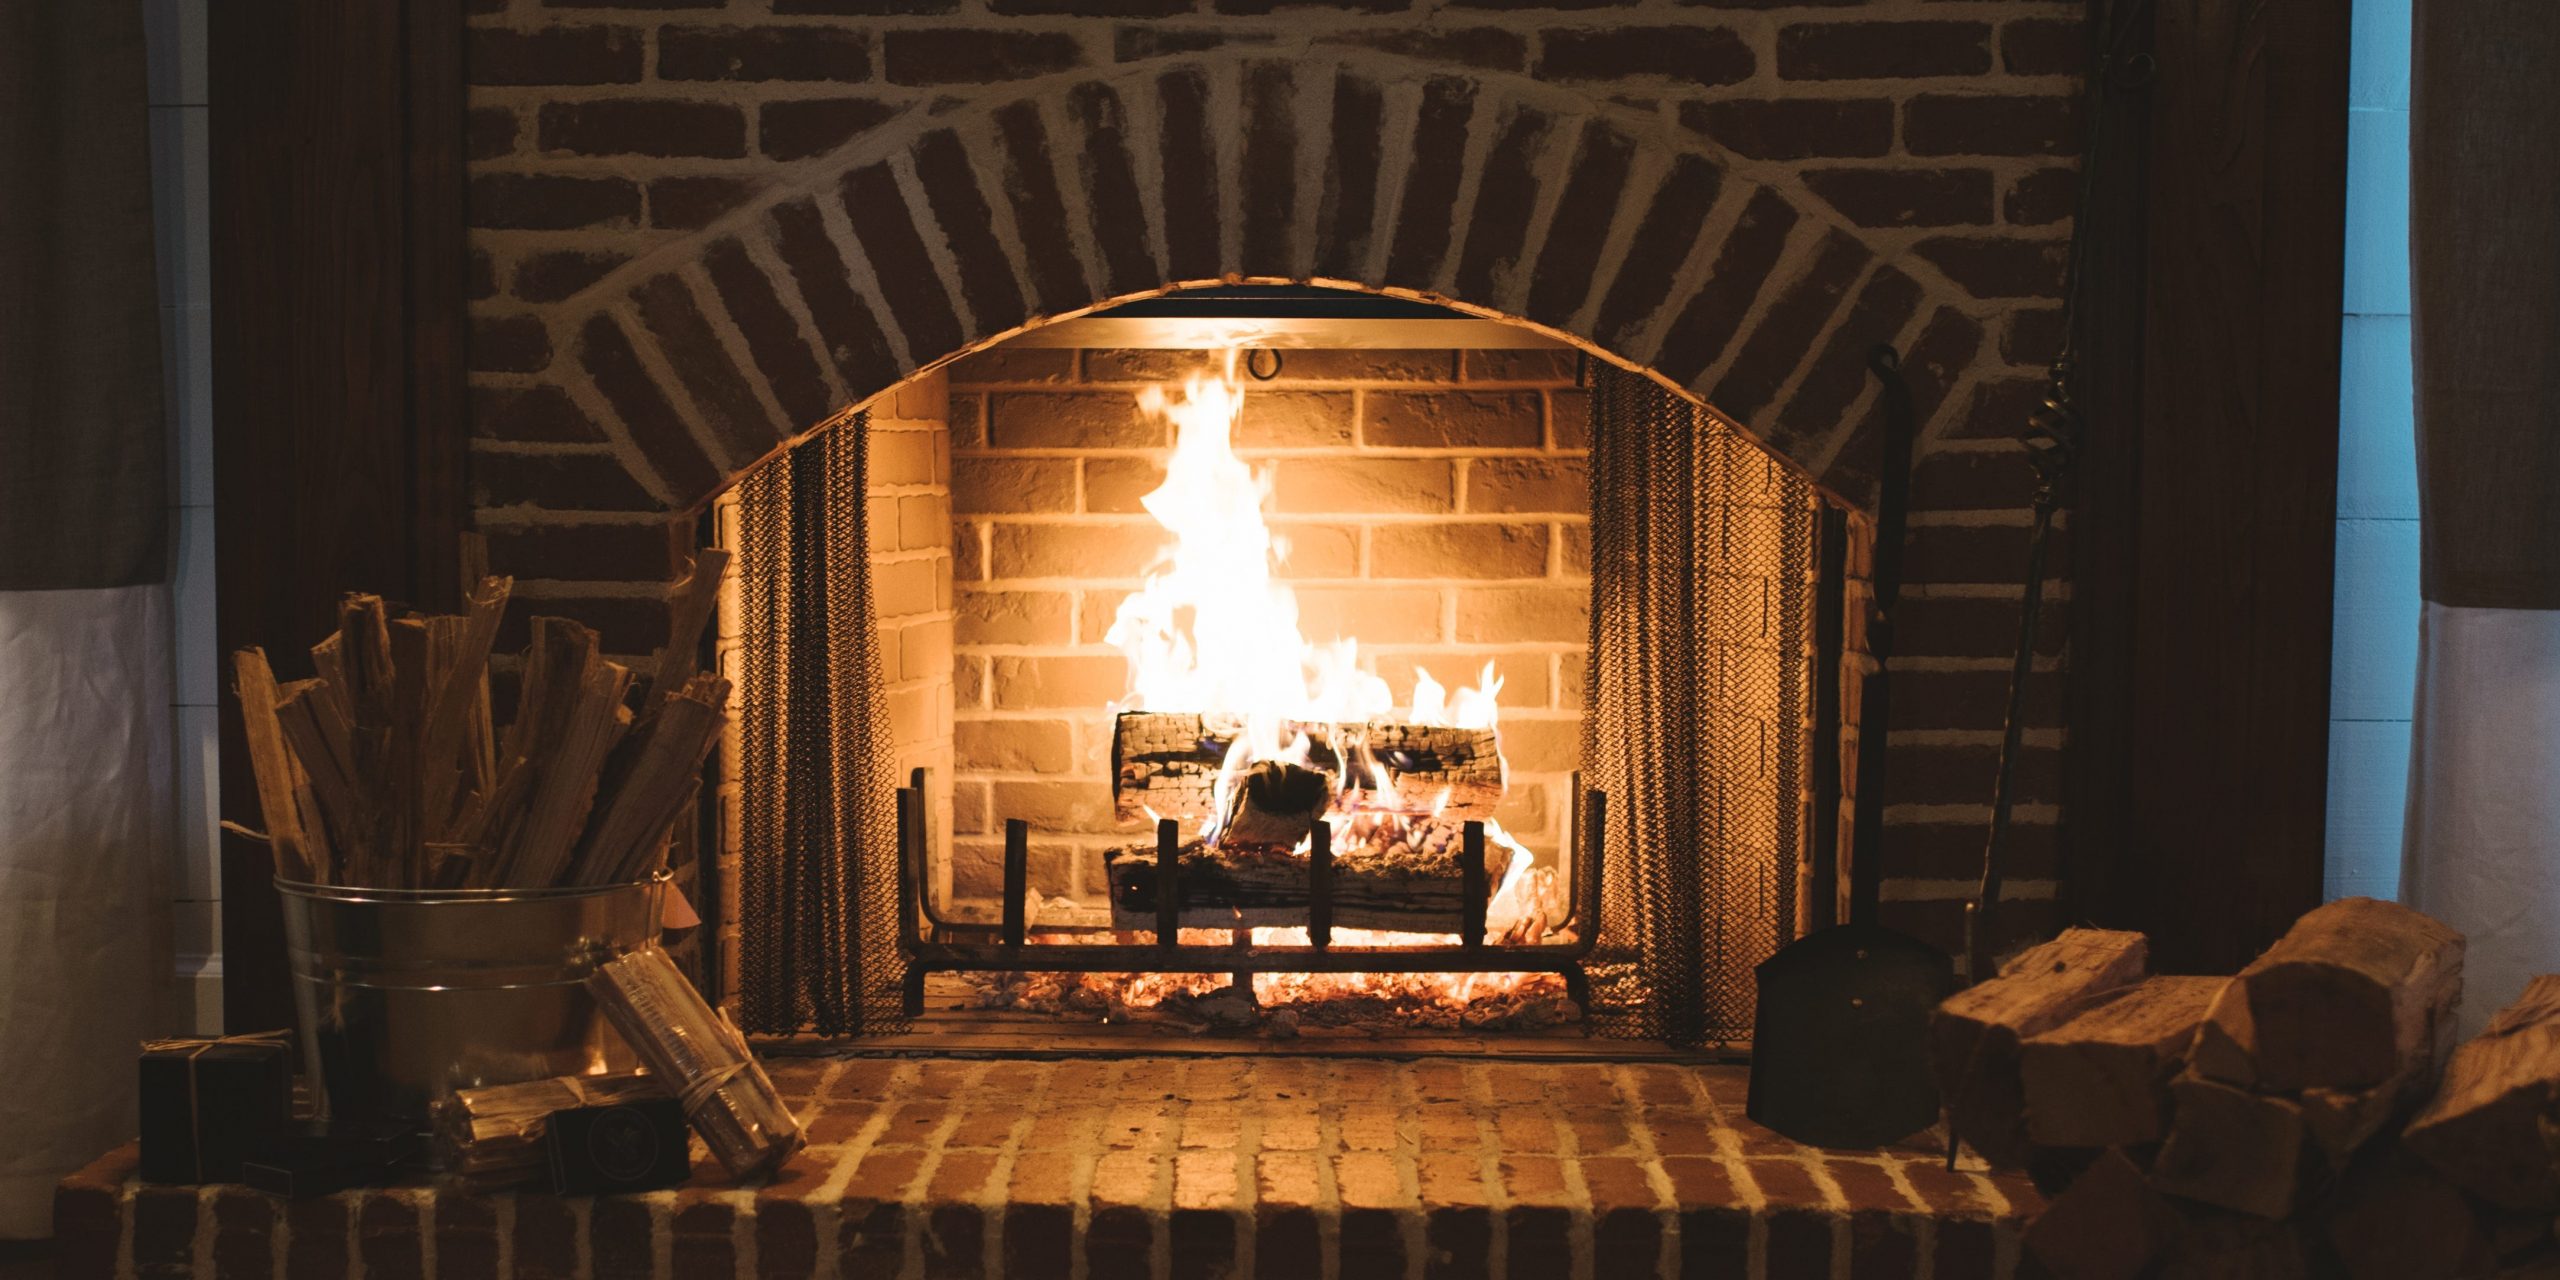 A large brick fireplace with a fire burning inside